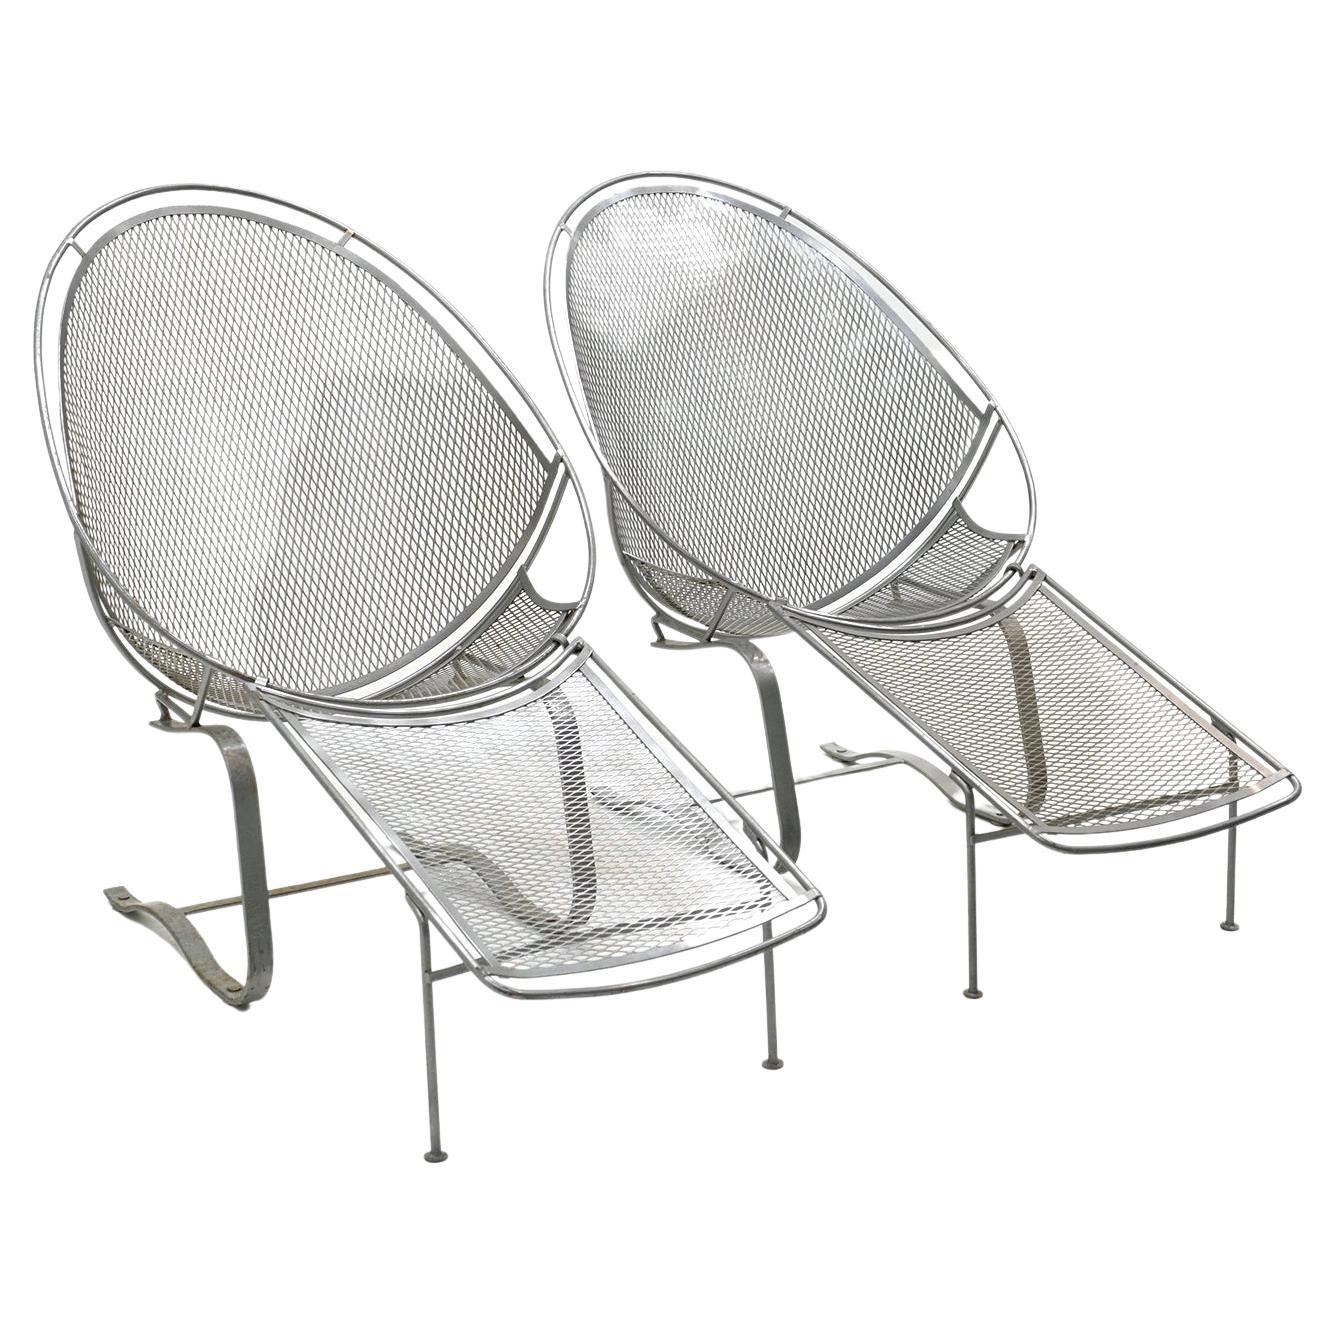 Pair John Salterini High Back Springer Egg Chairs with Detachable Footrests